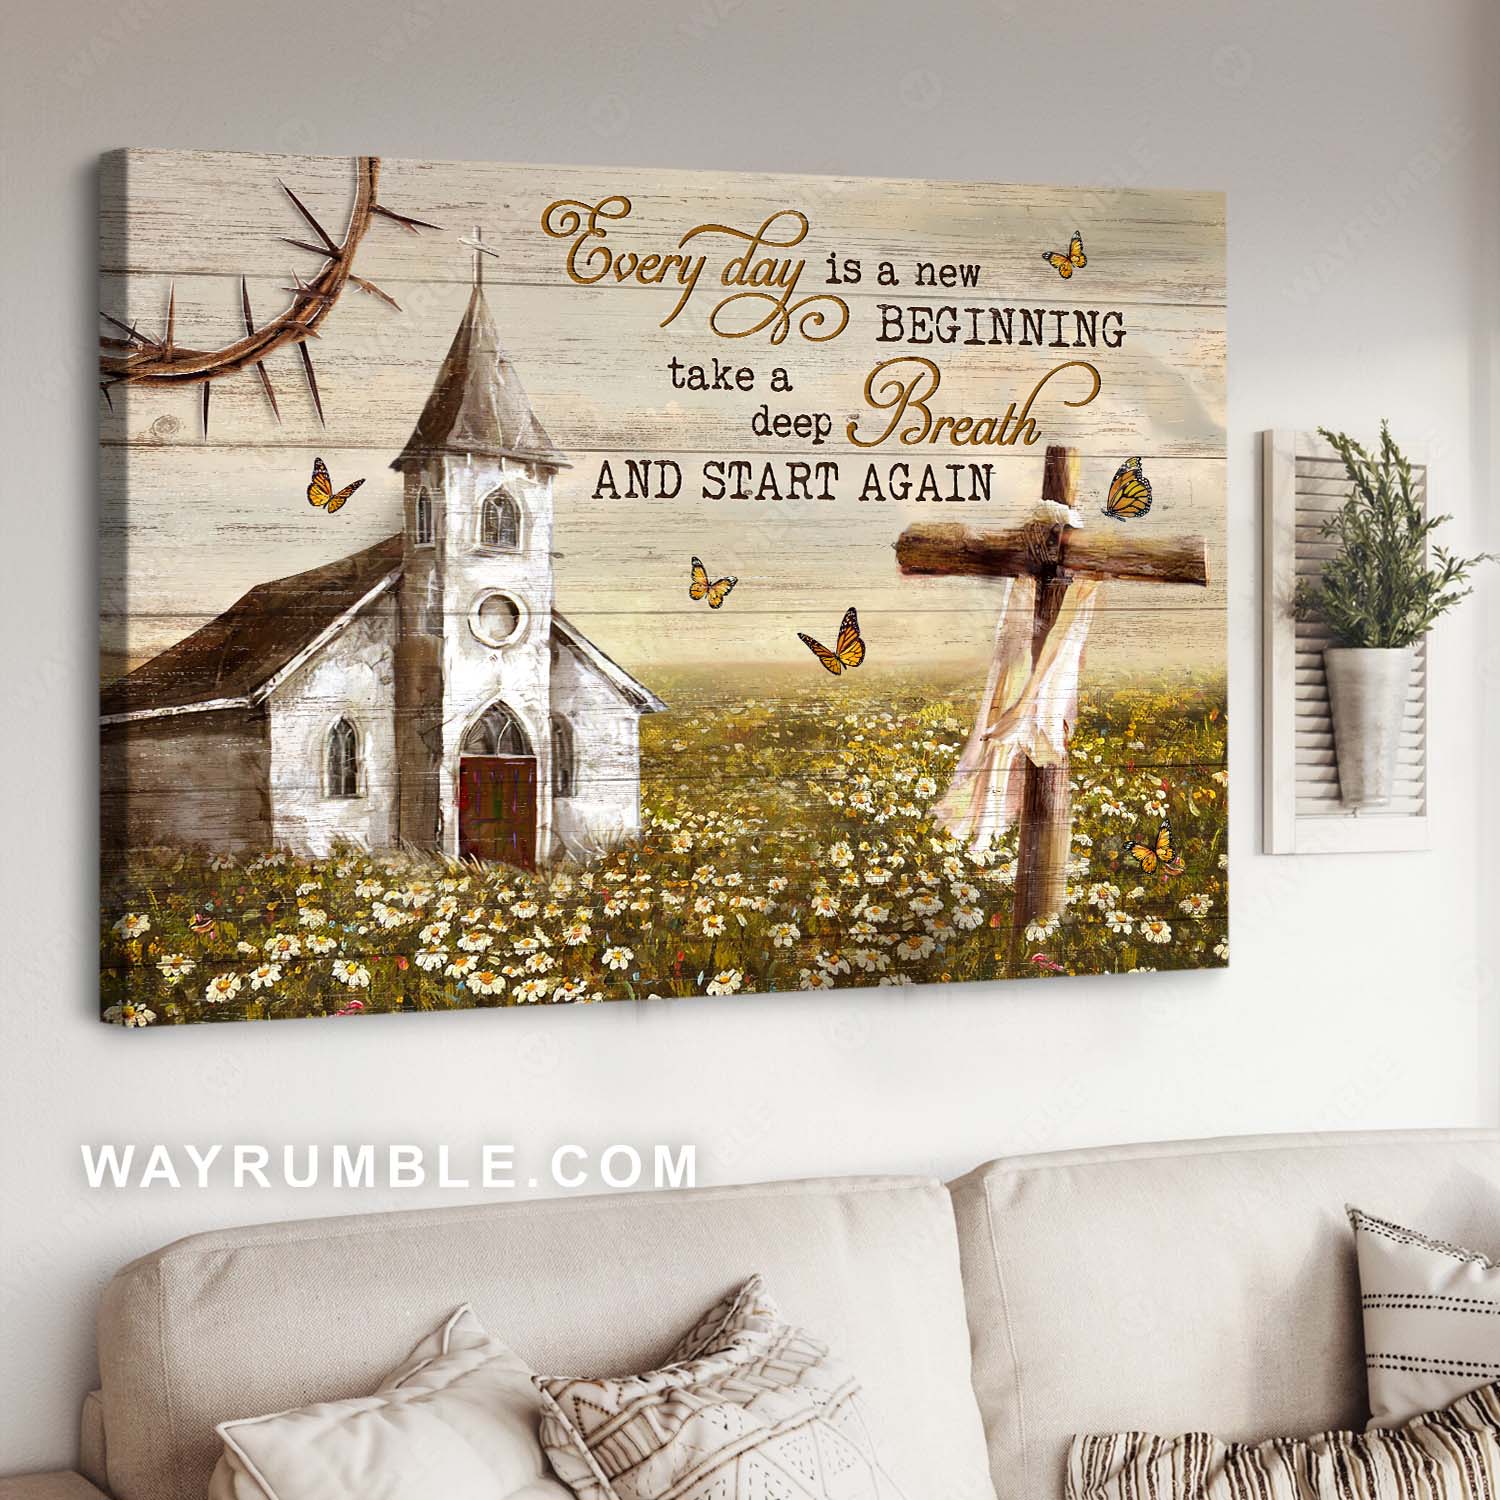 Vintage church, Rustic Daisy field, Monarch butterfly, Every day is a new beginning - Jesus Landscape Canvas Prints, Home Decor Wall Art